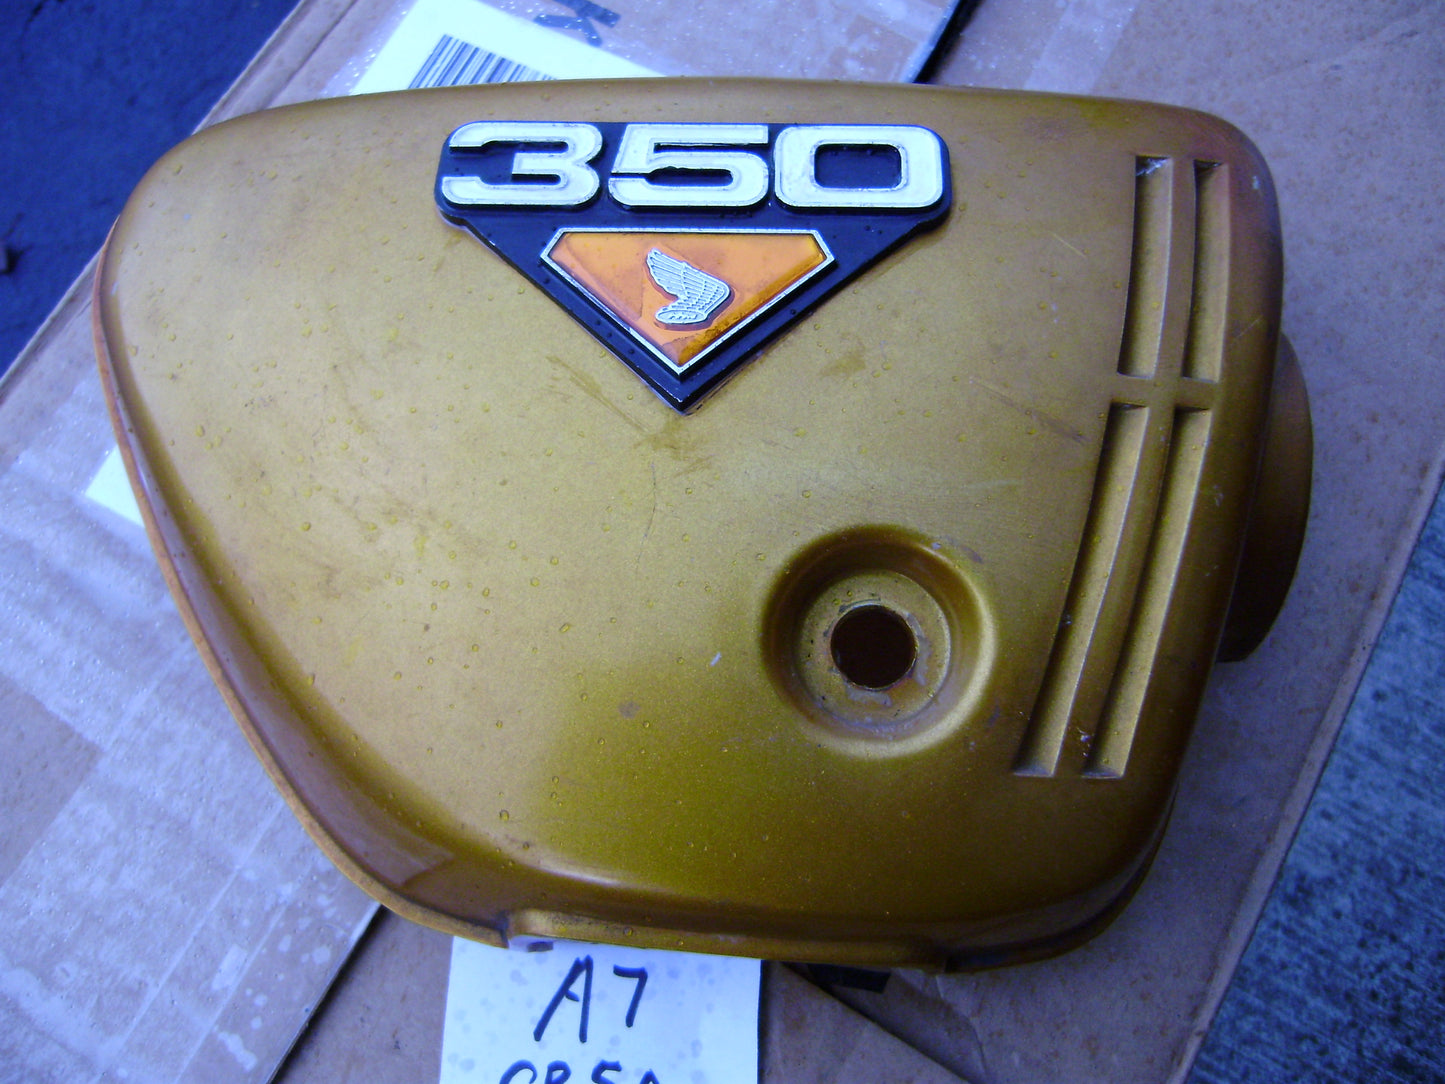 Sold as a pair on Ebay 06232020 Honda CB350 sidecover gold right sku 5905